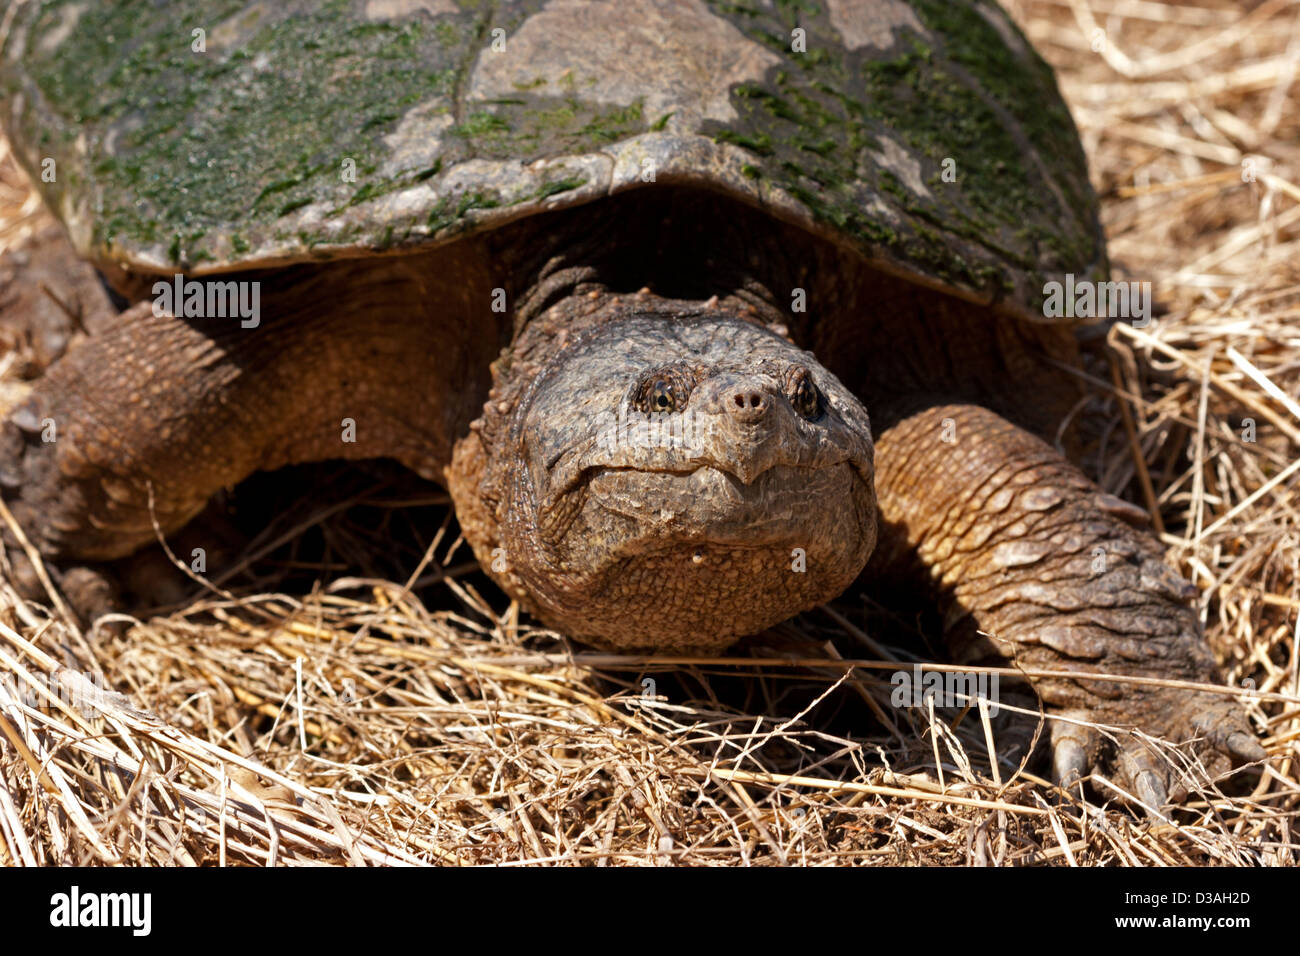 snapping turtle large reptile Stock Photo